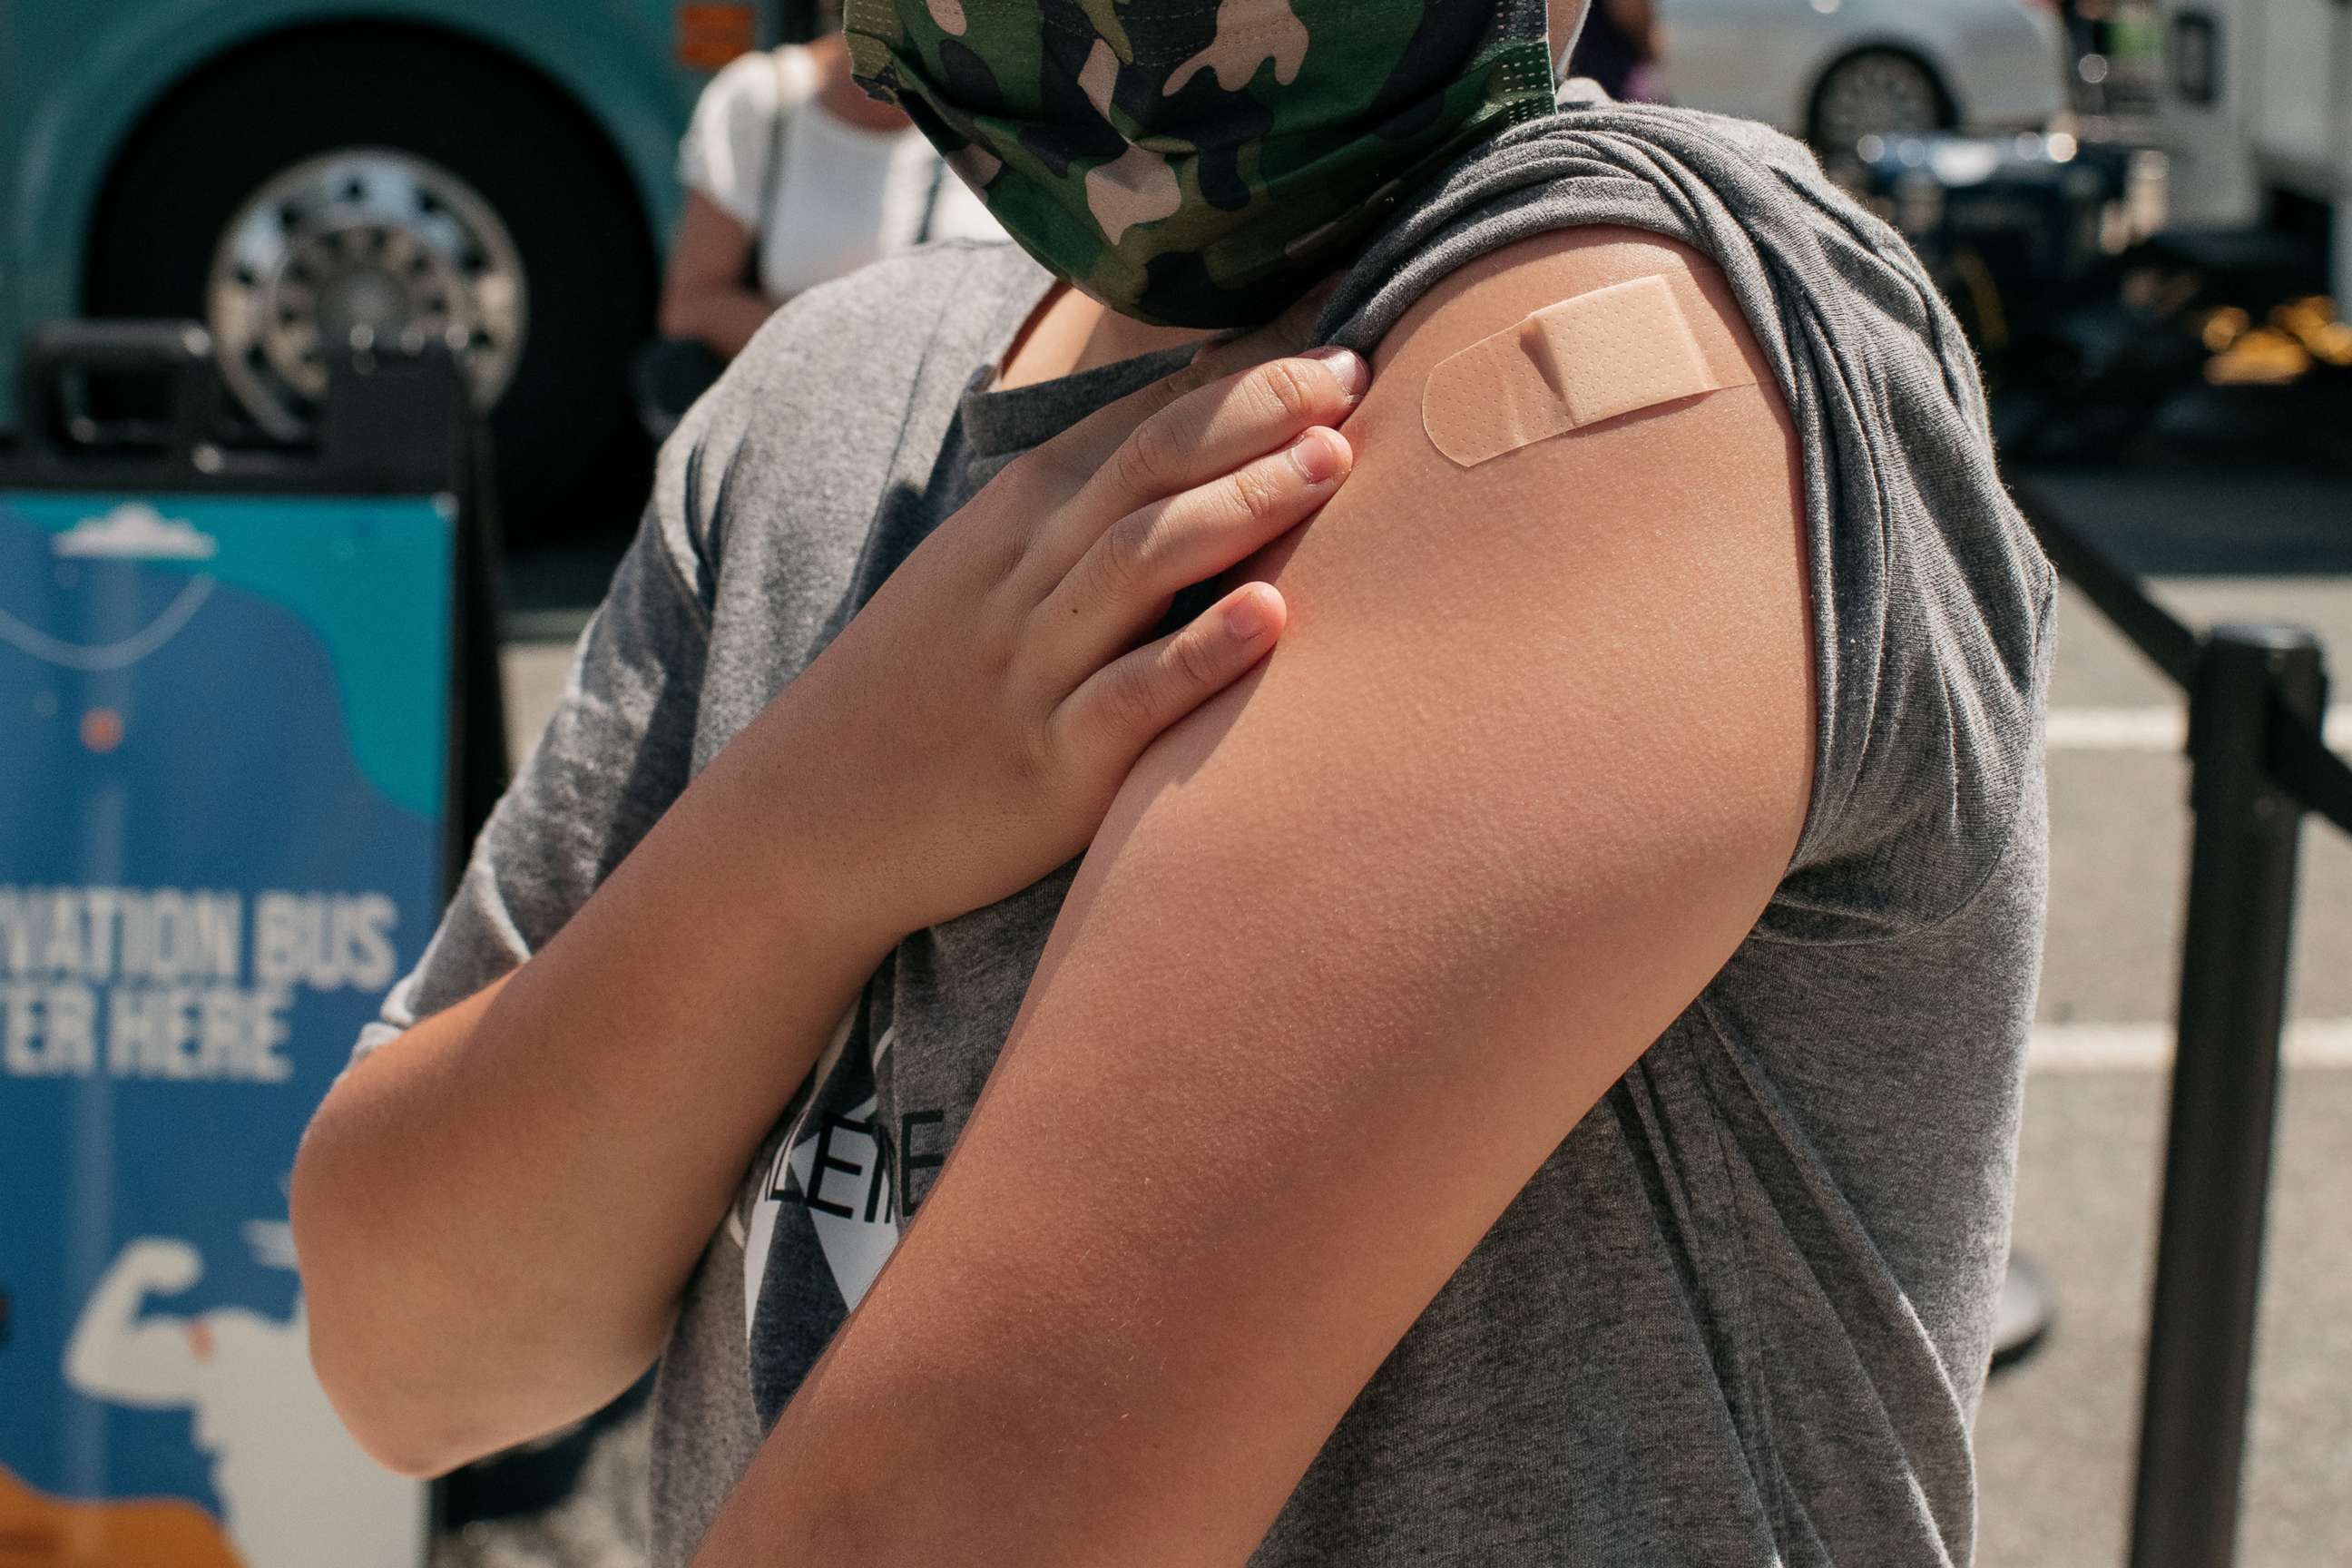 PHOTO: A 13-year-old newly vaccinated against COVID-19 shows his bandage at a pop-up vaccination site, June 5, 2021, in the Jackson Heights neighborhood in the Queens borough in New York.